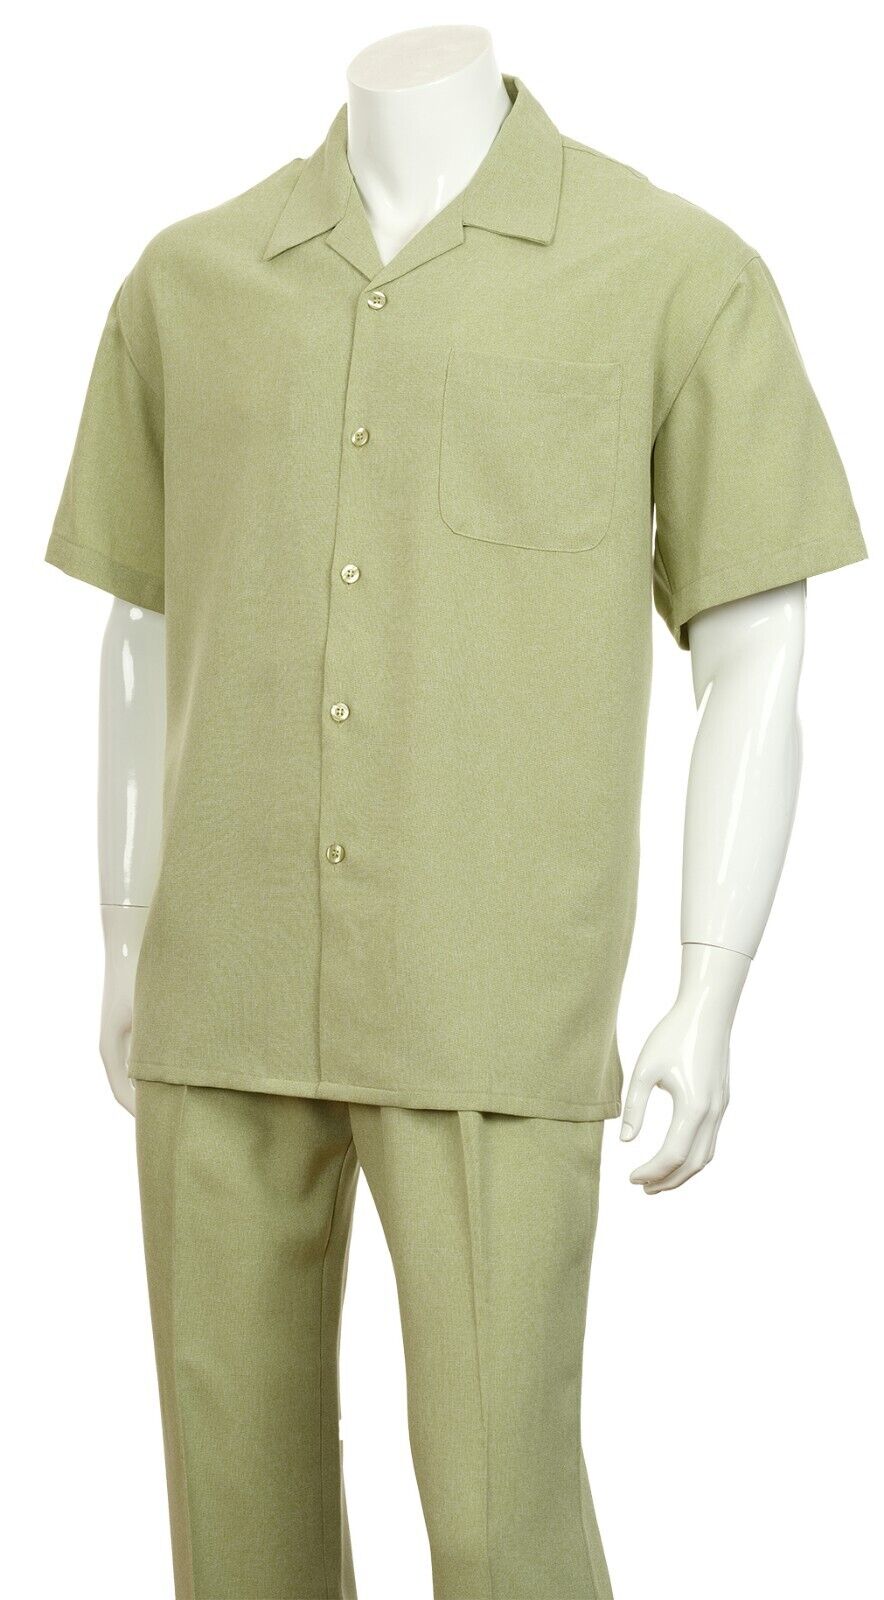 Fortino Landi Walking Set M2975-Olive - Church Suits For Less